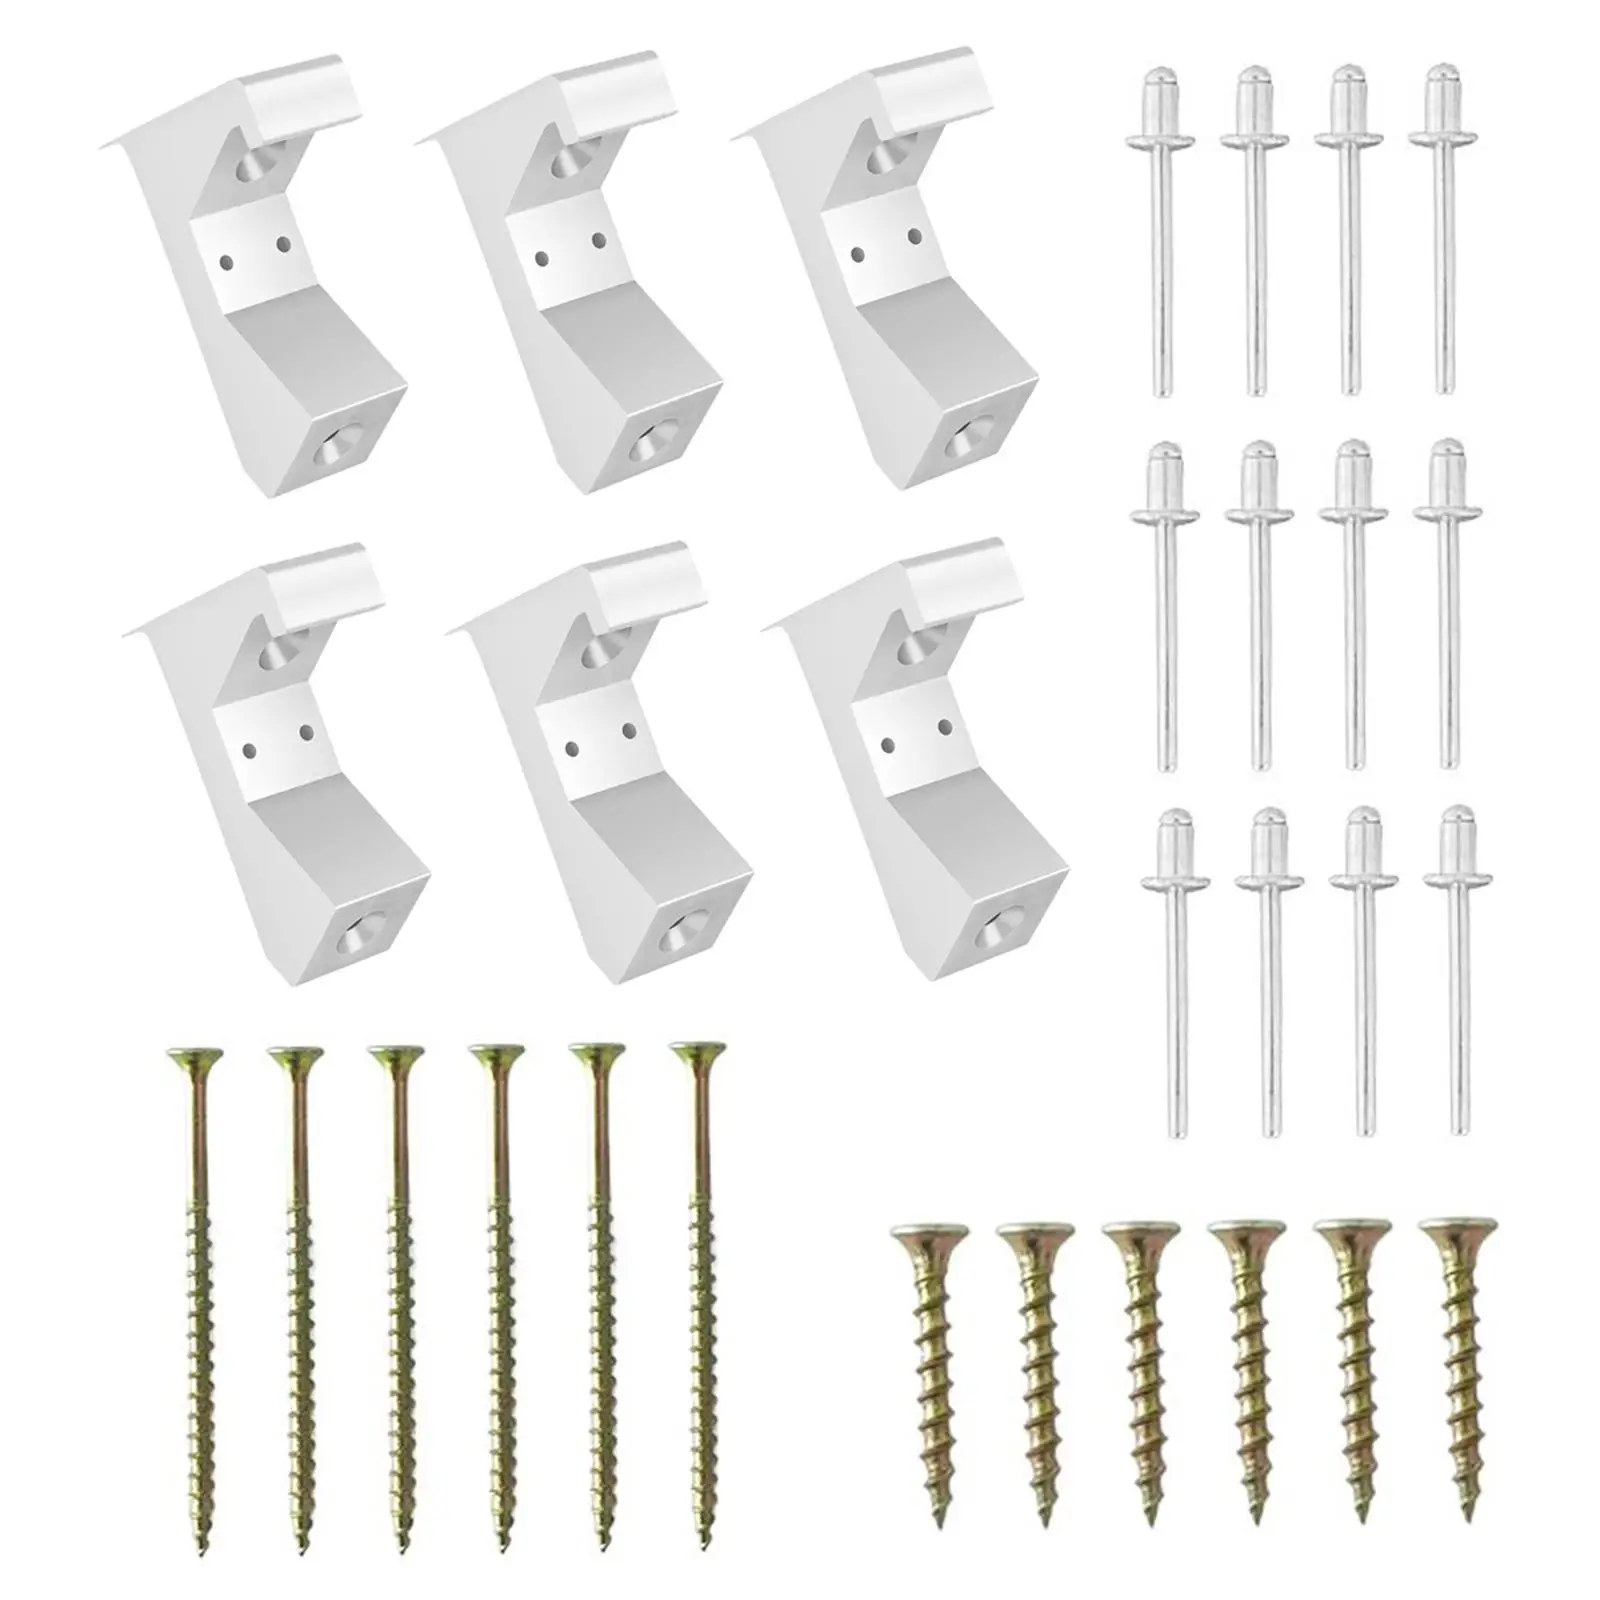 Squeaky Floor Repair Kit Effectively Attach Subfloor to Joists High Quality Floor Repair Tool with Screws Durable sturdy